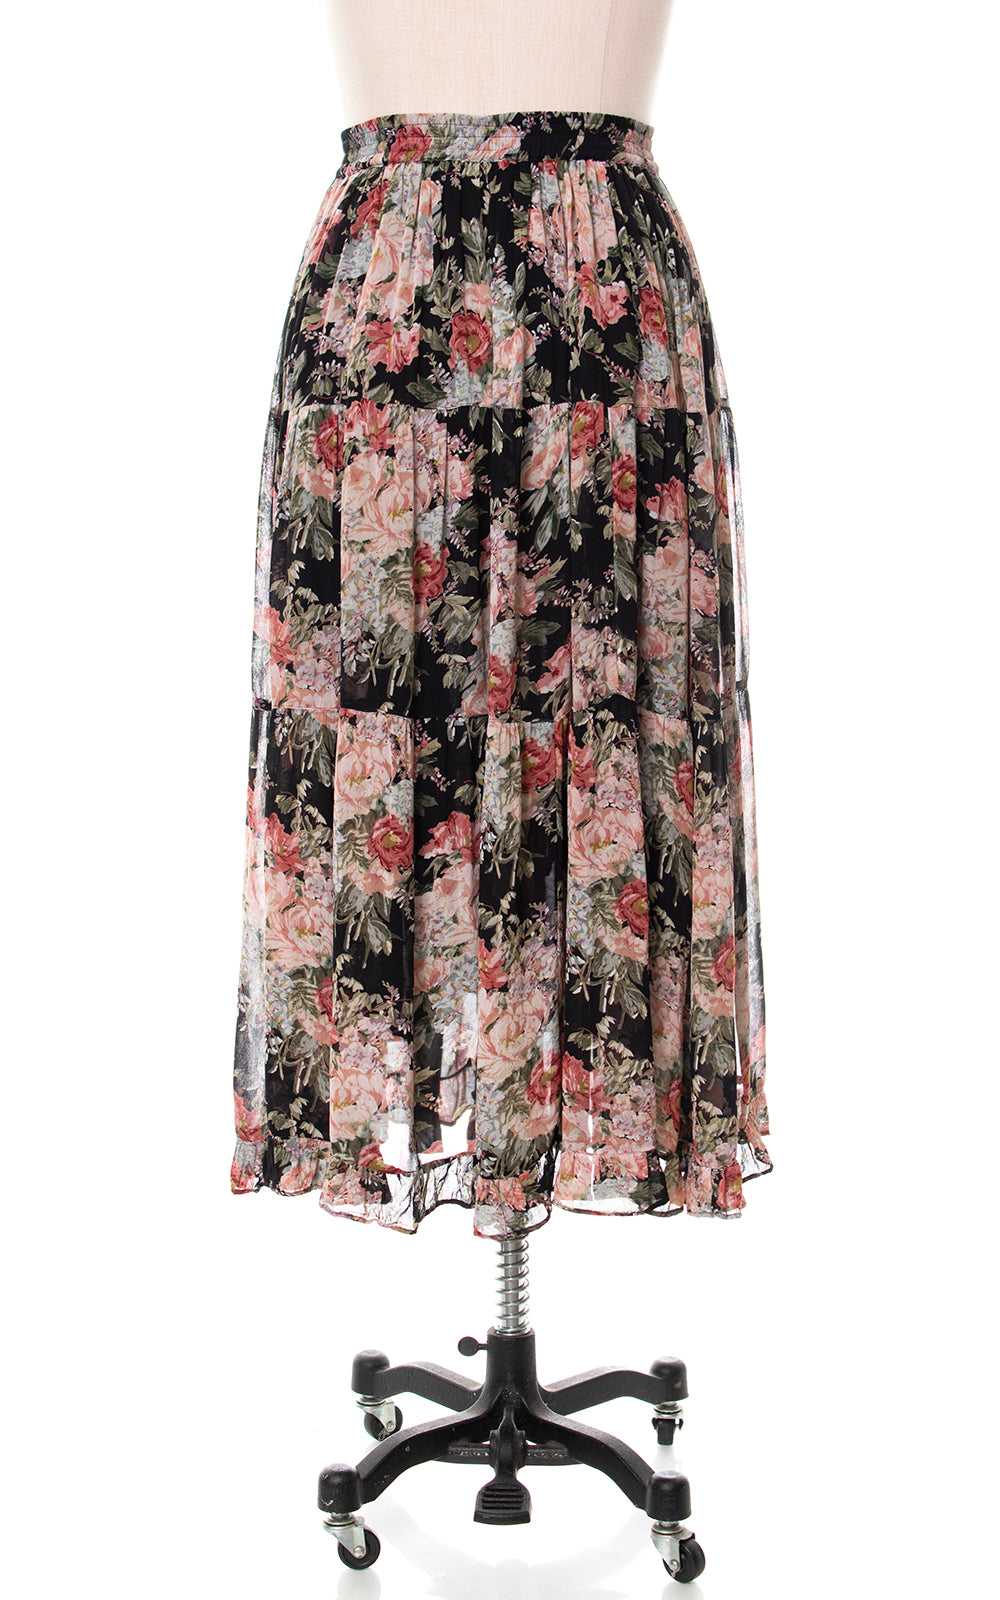 1980s Floral Rayon Tiered Skirt | small/medium - image 5